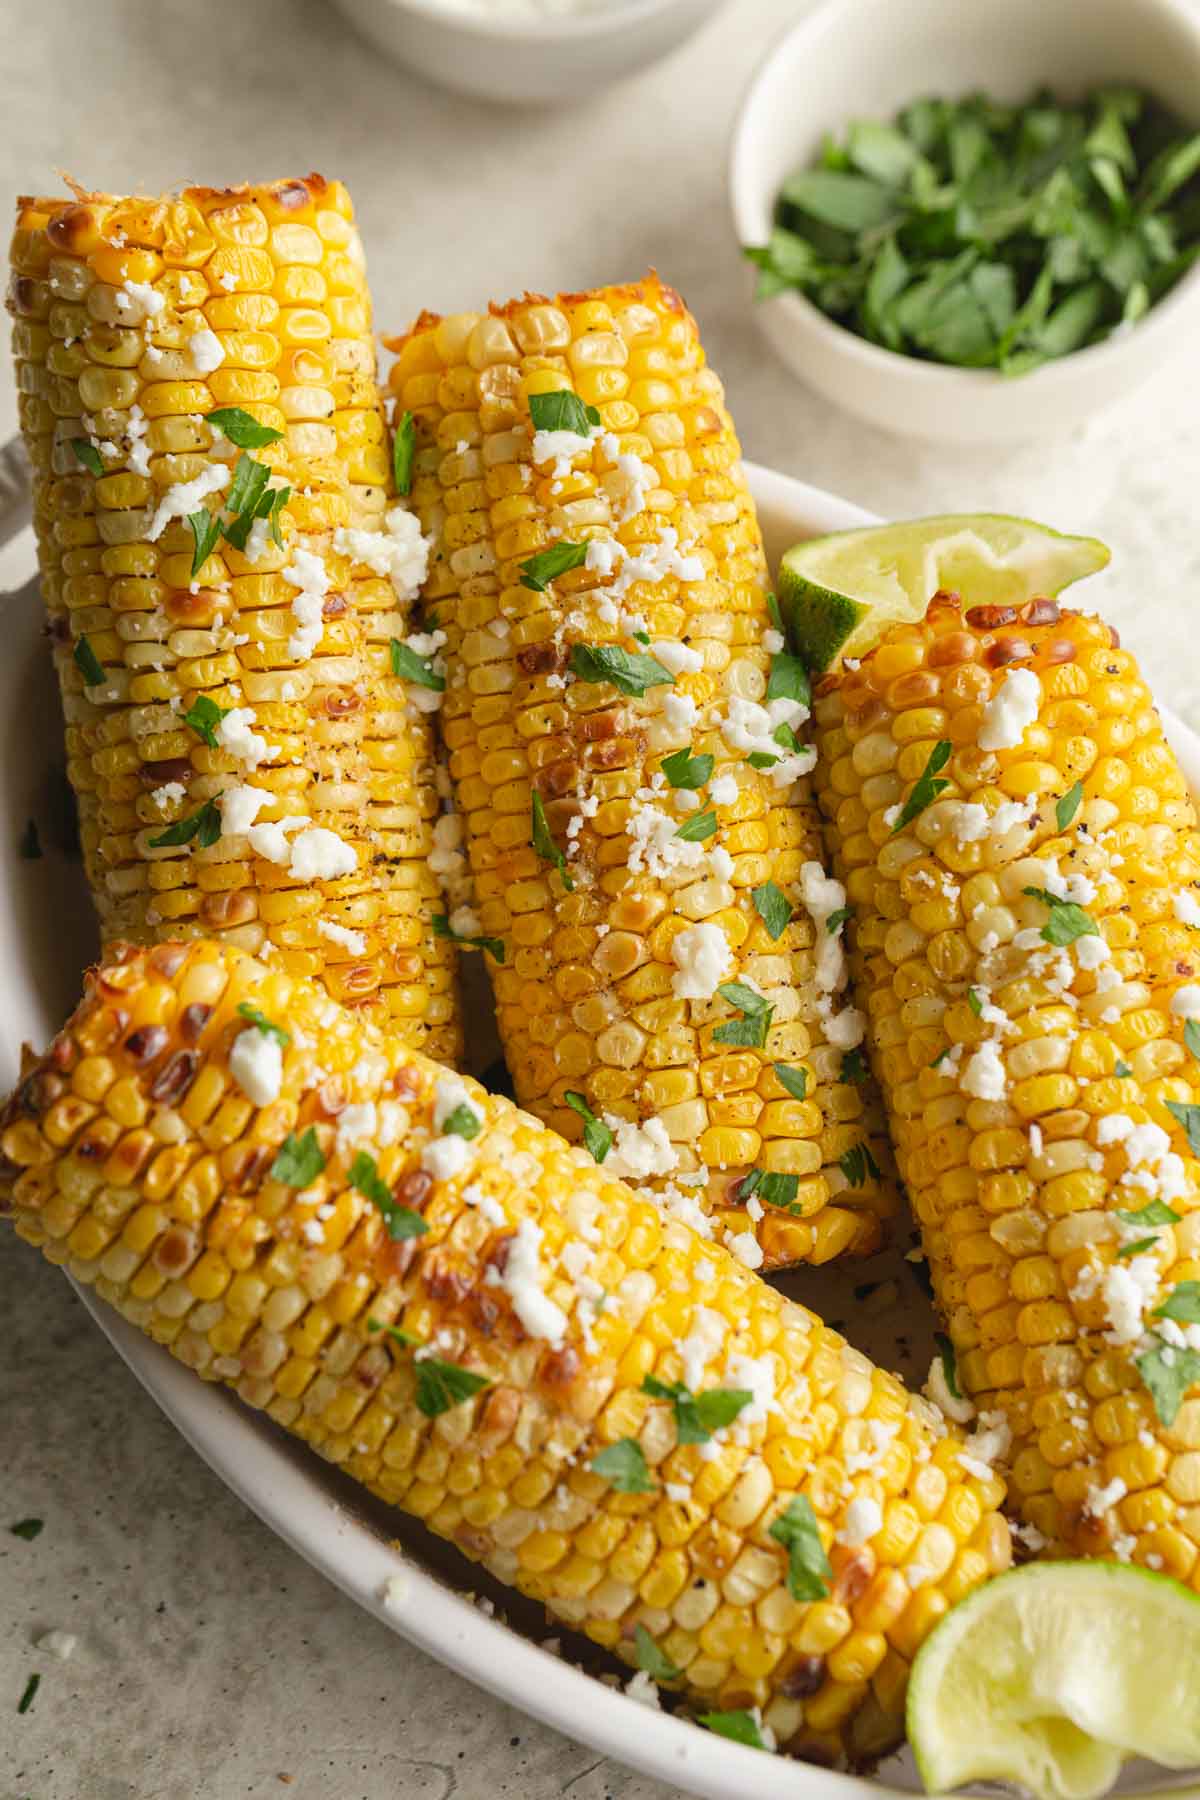 Corn on the cob in a white dish and topped with parsley and feta.